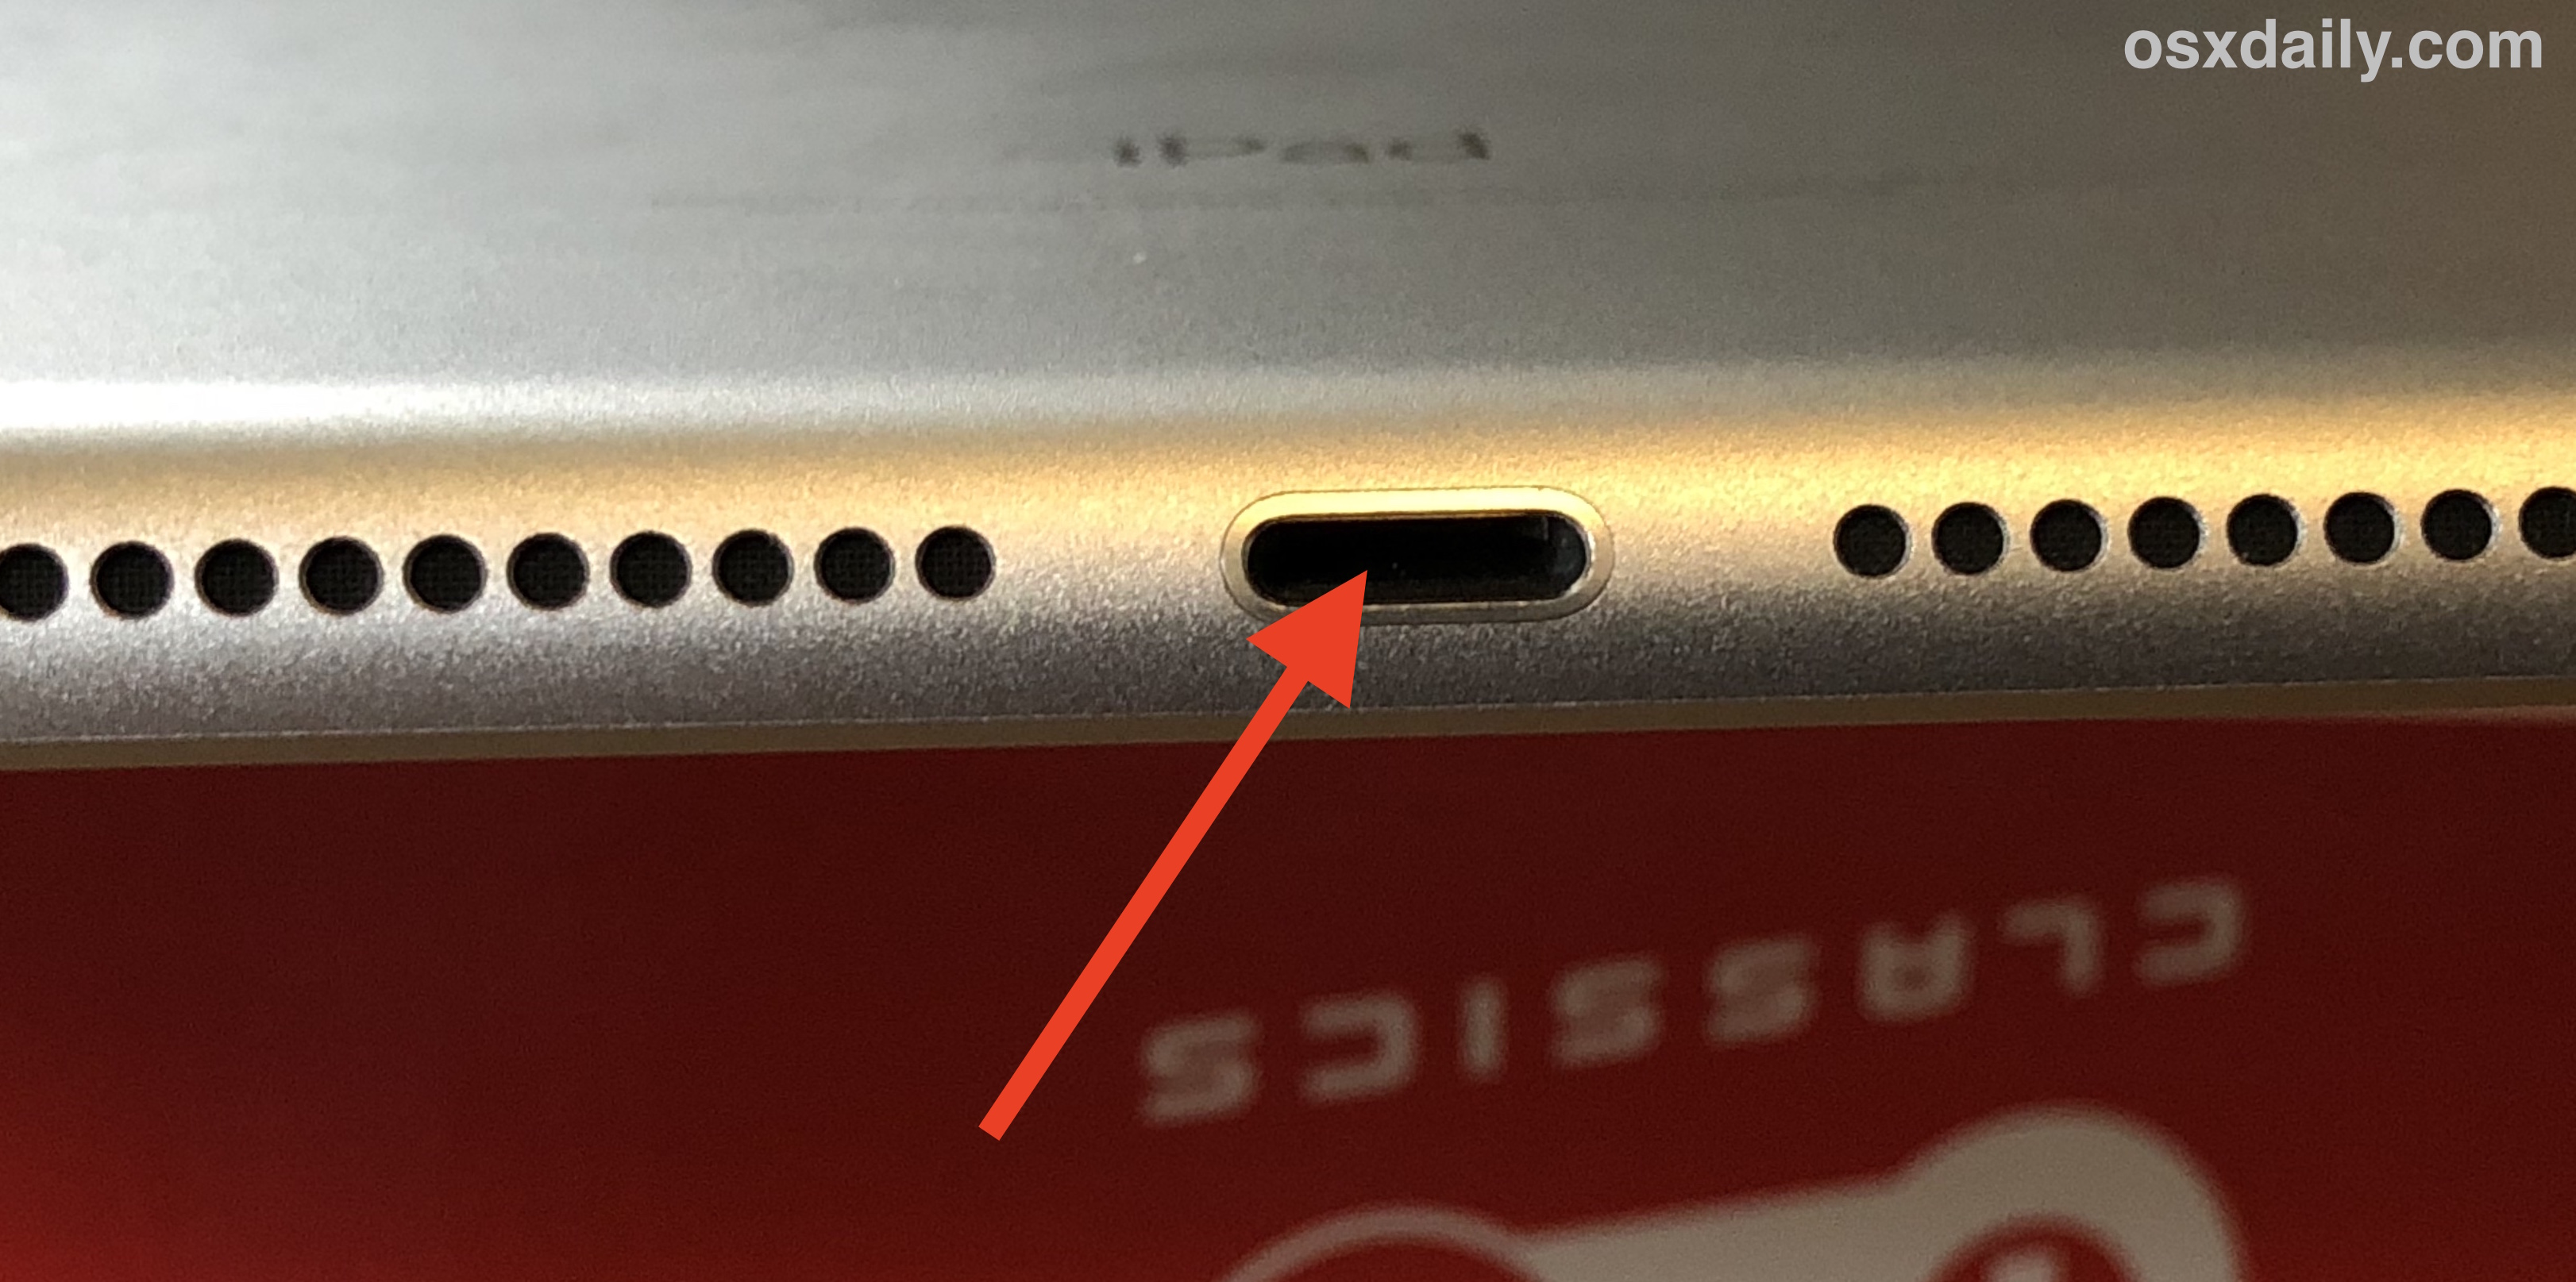 Check Ipad Port For Obstruction 